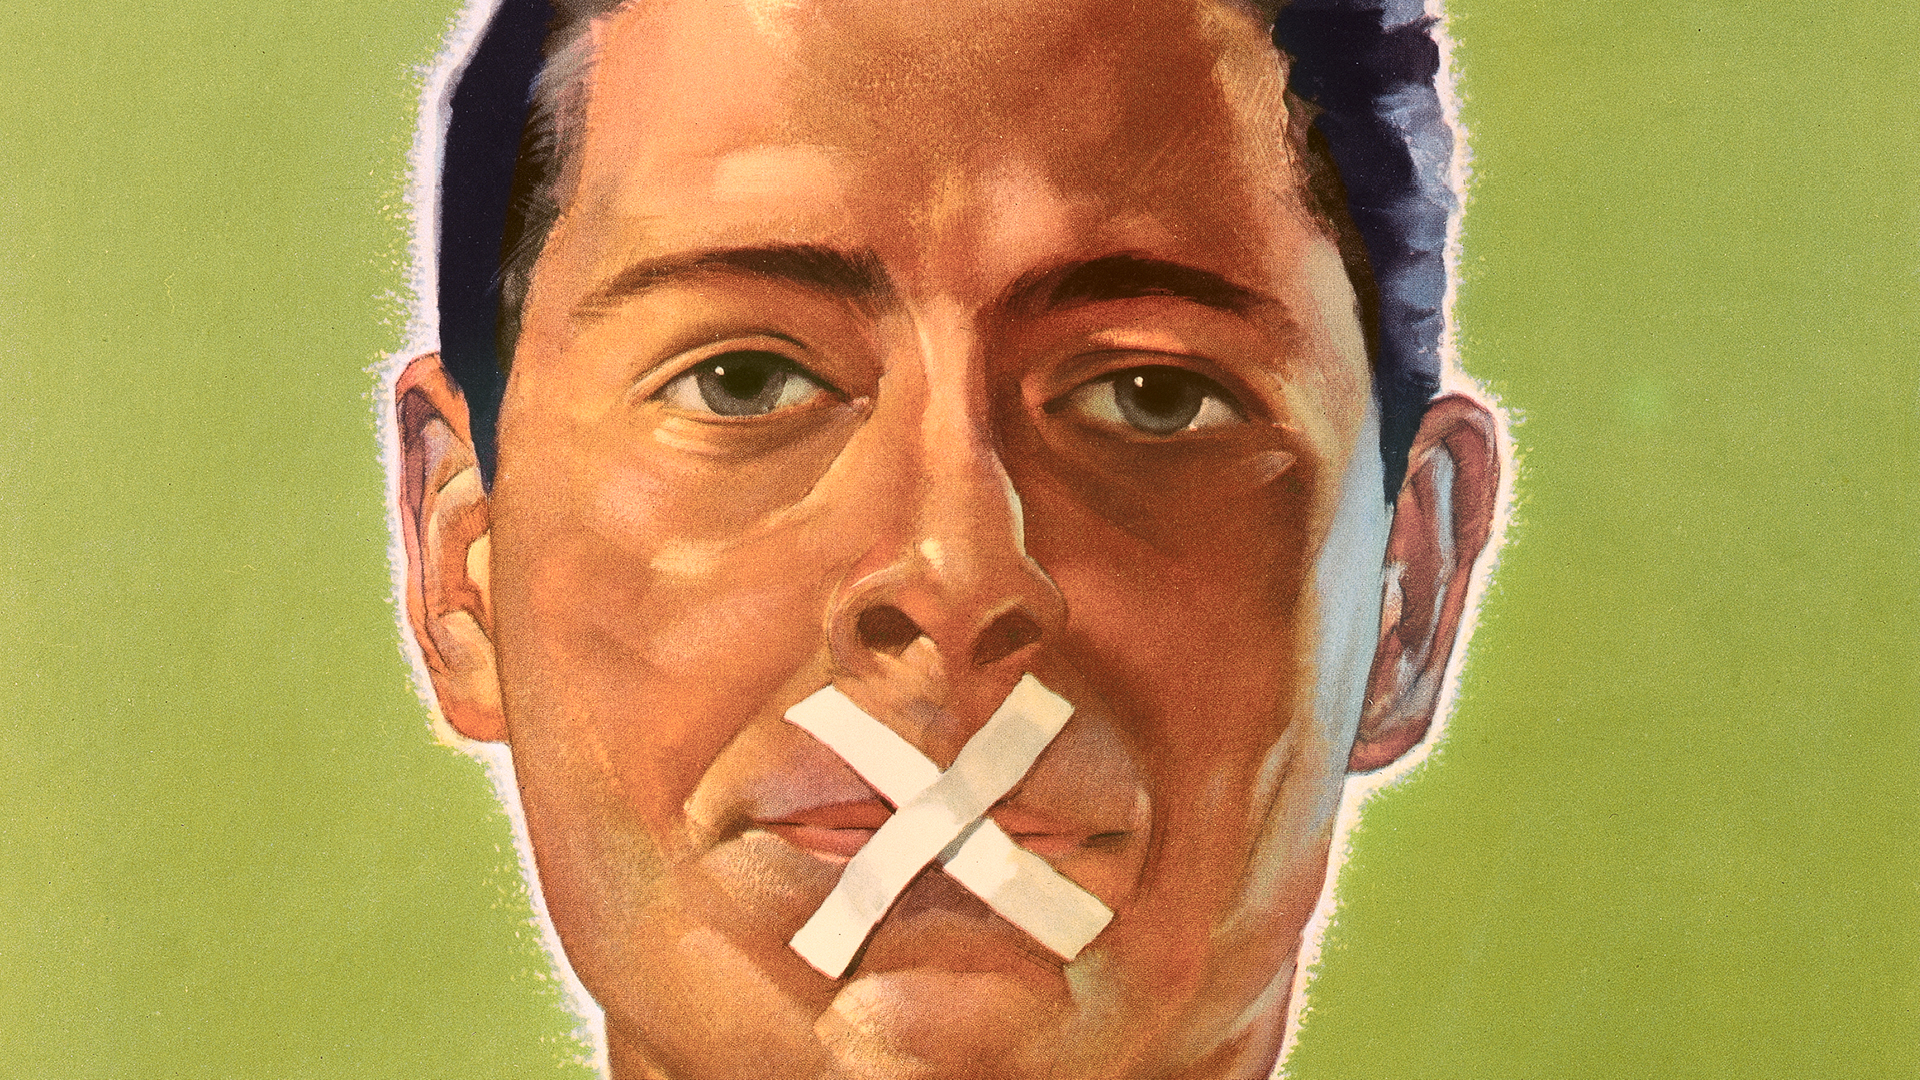 A lithographic poster of a man's face with an X across his lips.